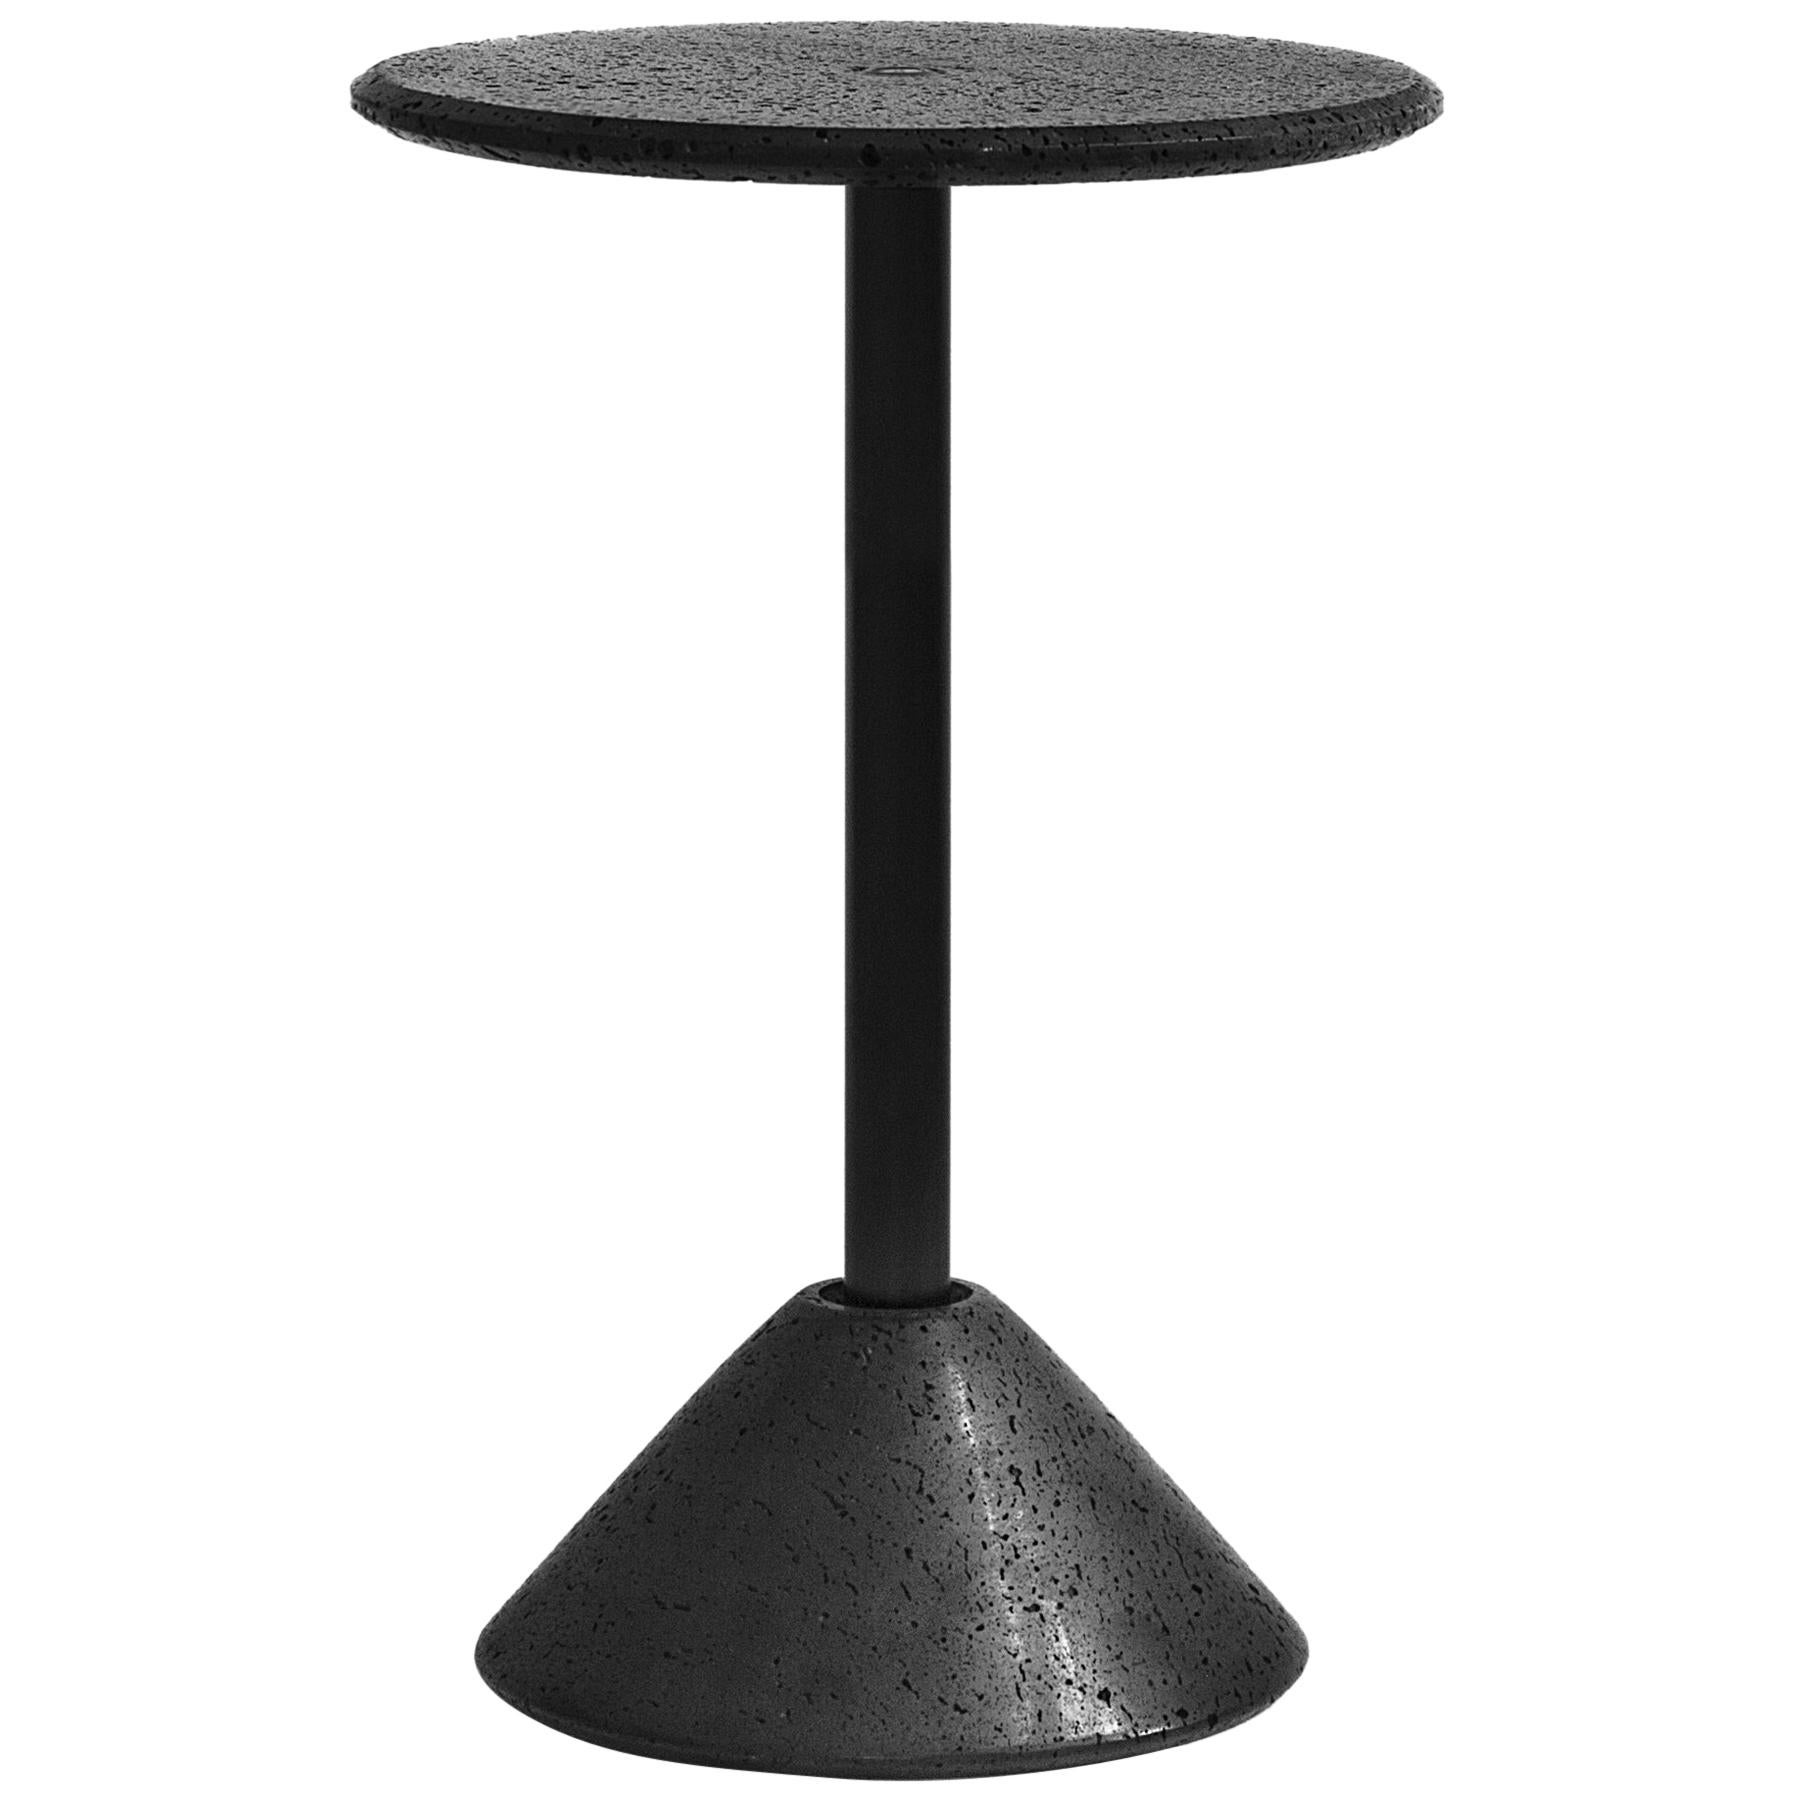 Lava Stone Dinning Table, “Ding, ” S, by Buzao